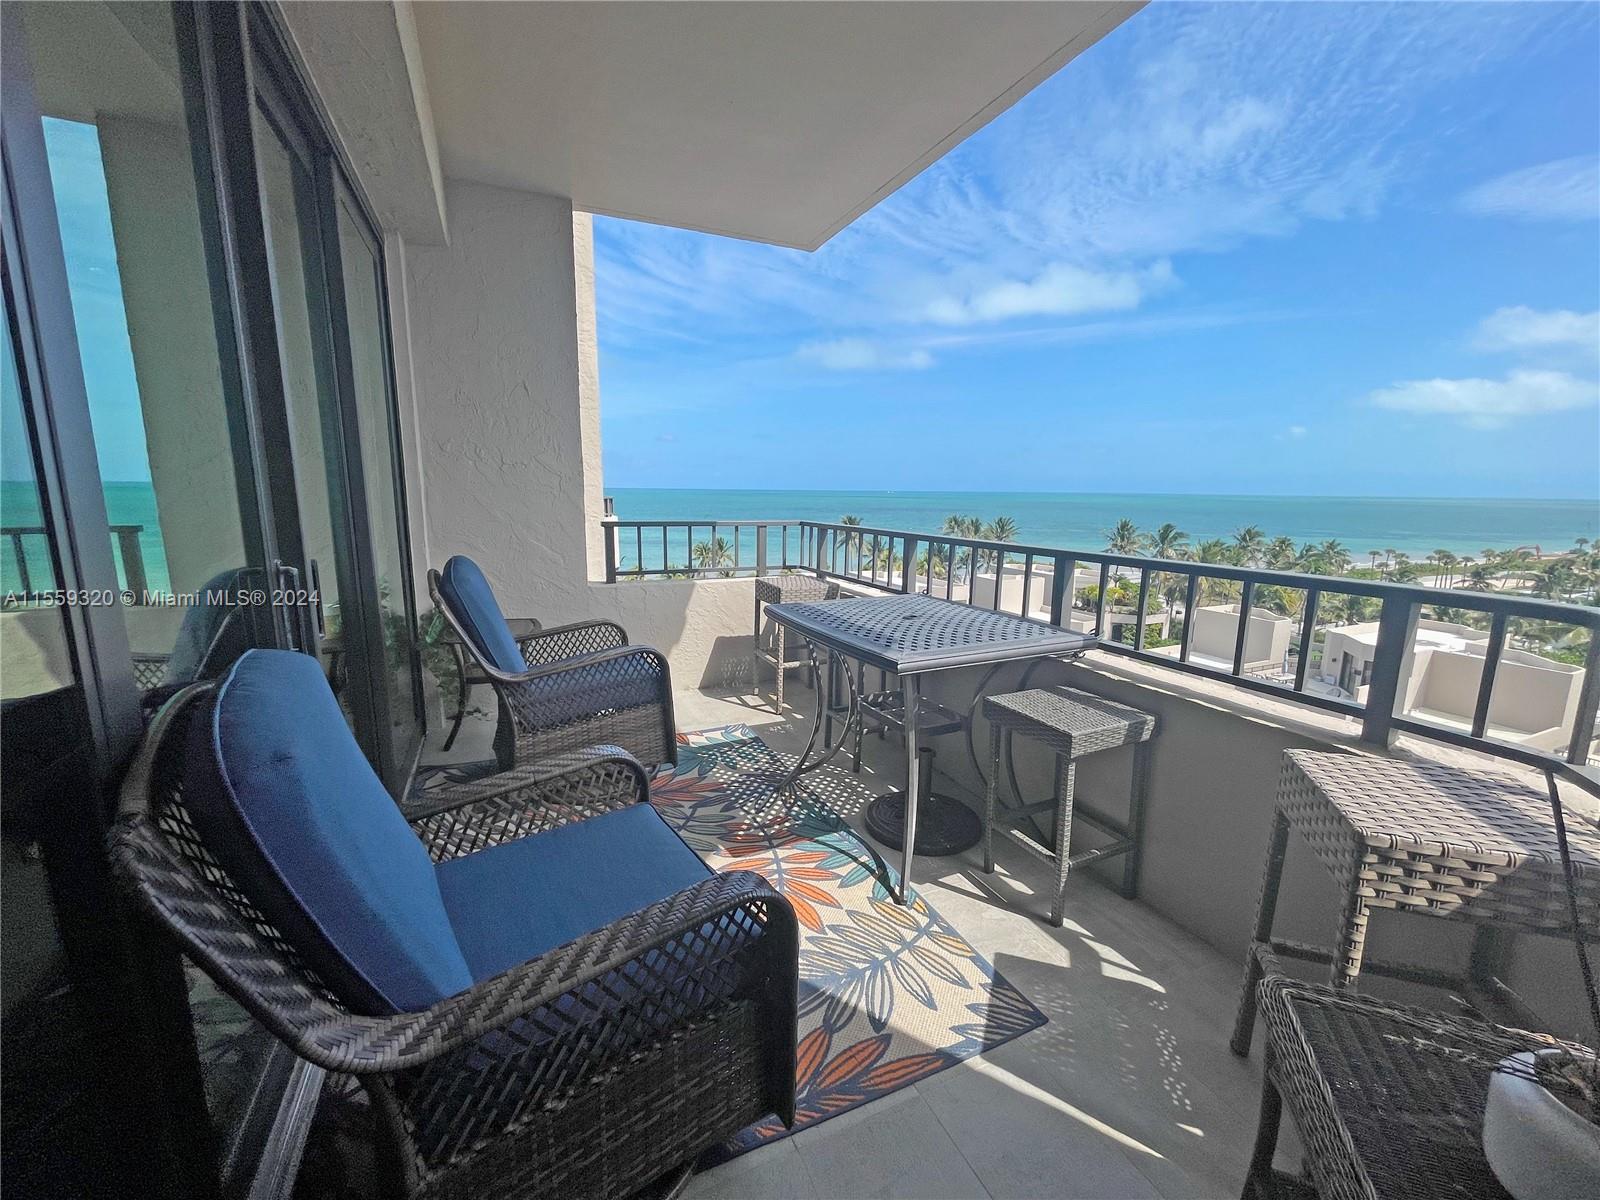 Six month rental now available in the sought-after oceanfront Tidemark building of Key Colony on Key Biscayne!  This condo has beautiful ocean views from bedrooms, living room and balcony.  Completely renovated with everything new, including impact windows/door and sound insulation.  Cooking is a joy in the large gourmet kitchen with induction cooktop and built-in double oven/microwave.  Relax in the primary suite's stunning spa wet room. Steam shower in guest bath. Duravit sensowash toilets. Amenities incl. private access to beach, three swimming pools, twelve tennis courts, fitness center, spa, convenience food store, pool bar restaurant, playground and library. Lobby concierge, management office onsite, and guard at gate. Experience for yourself the beachfront lifestyle of Key Biscayne.